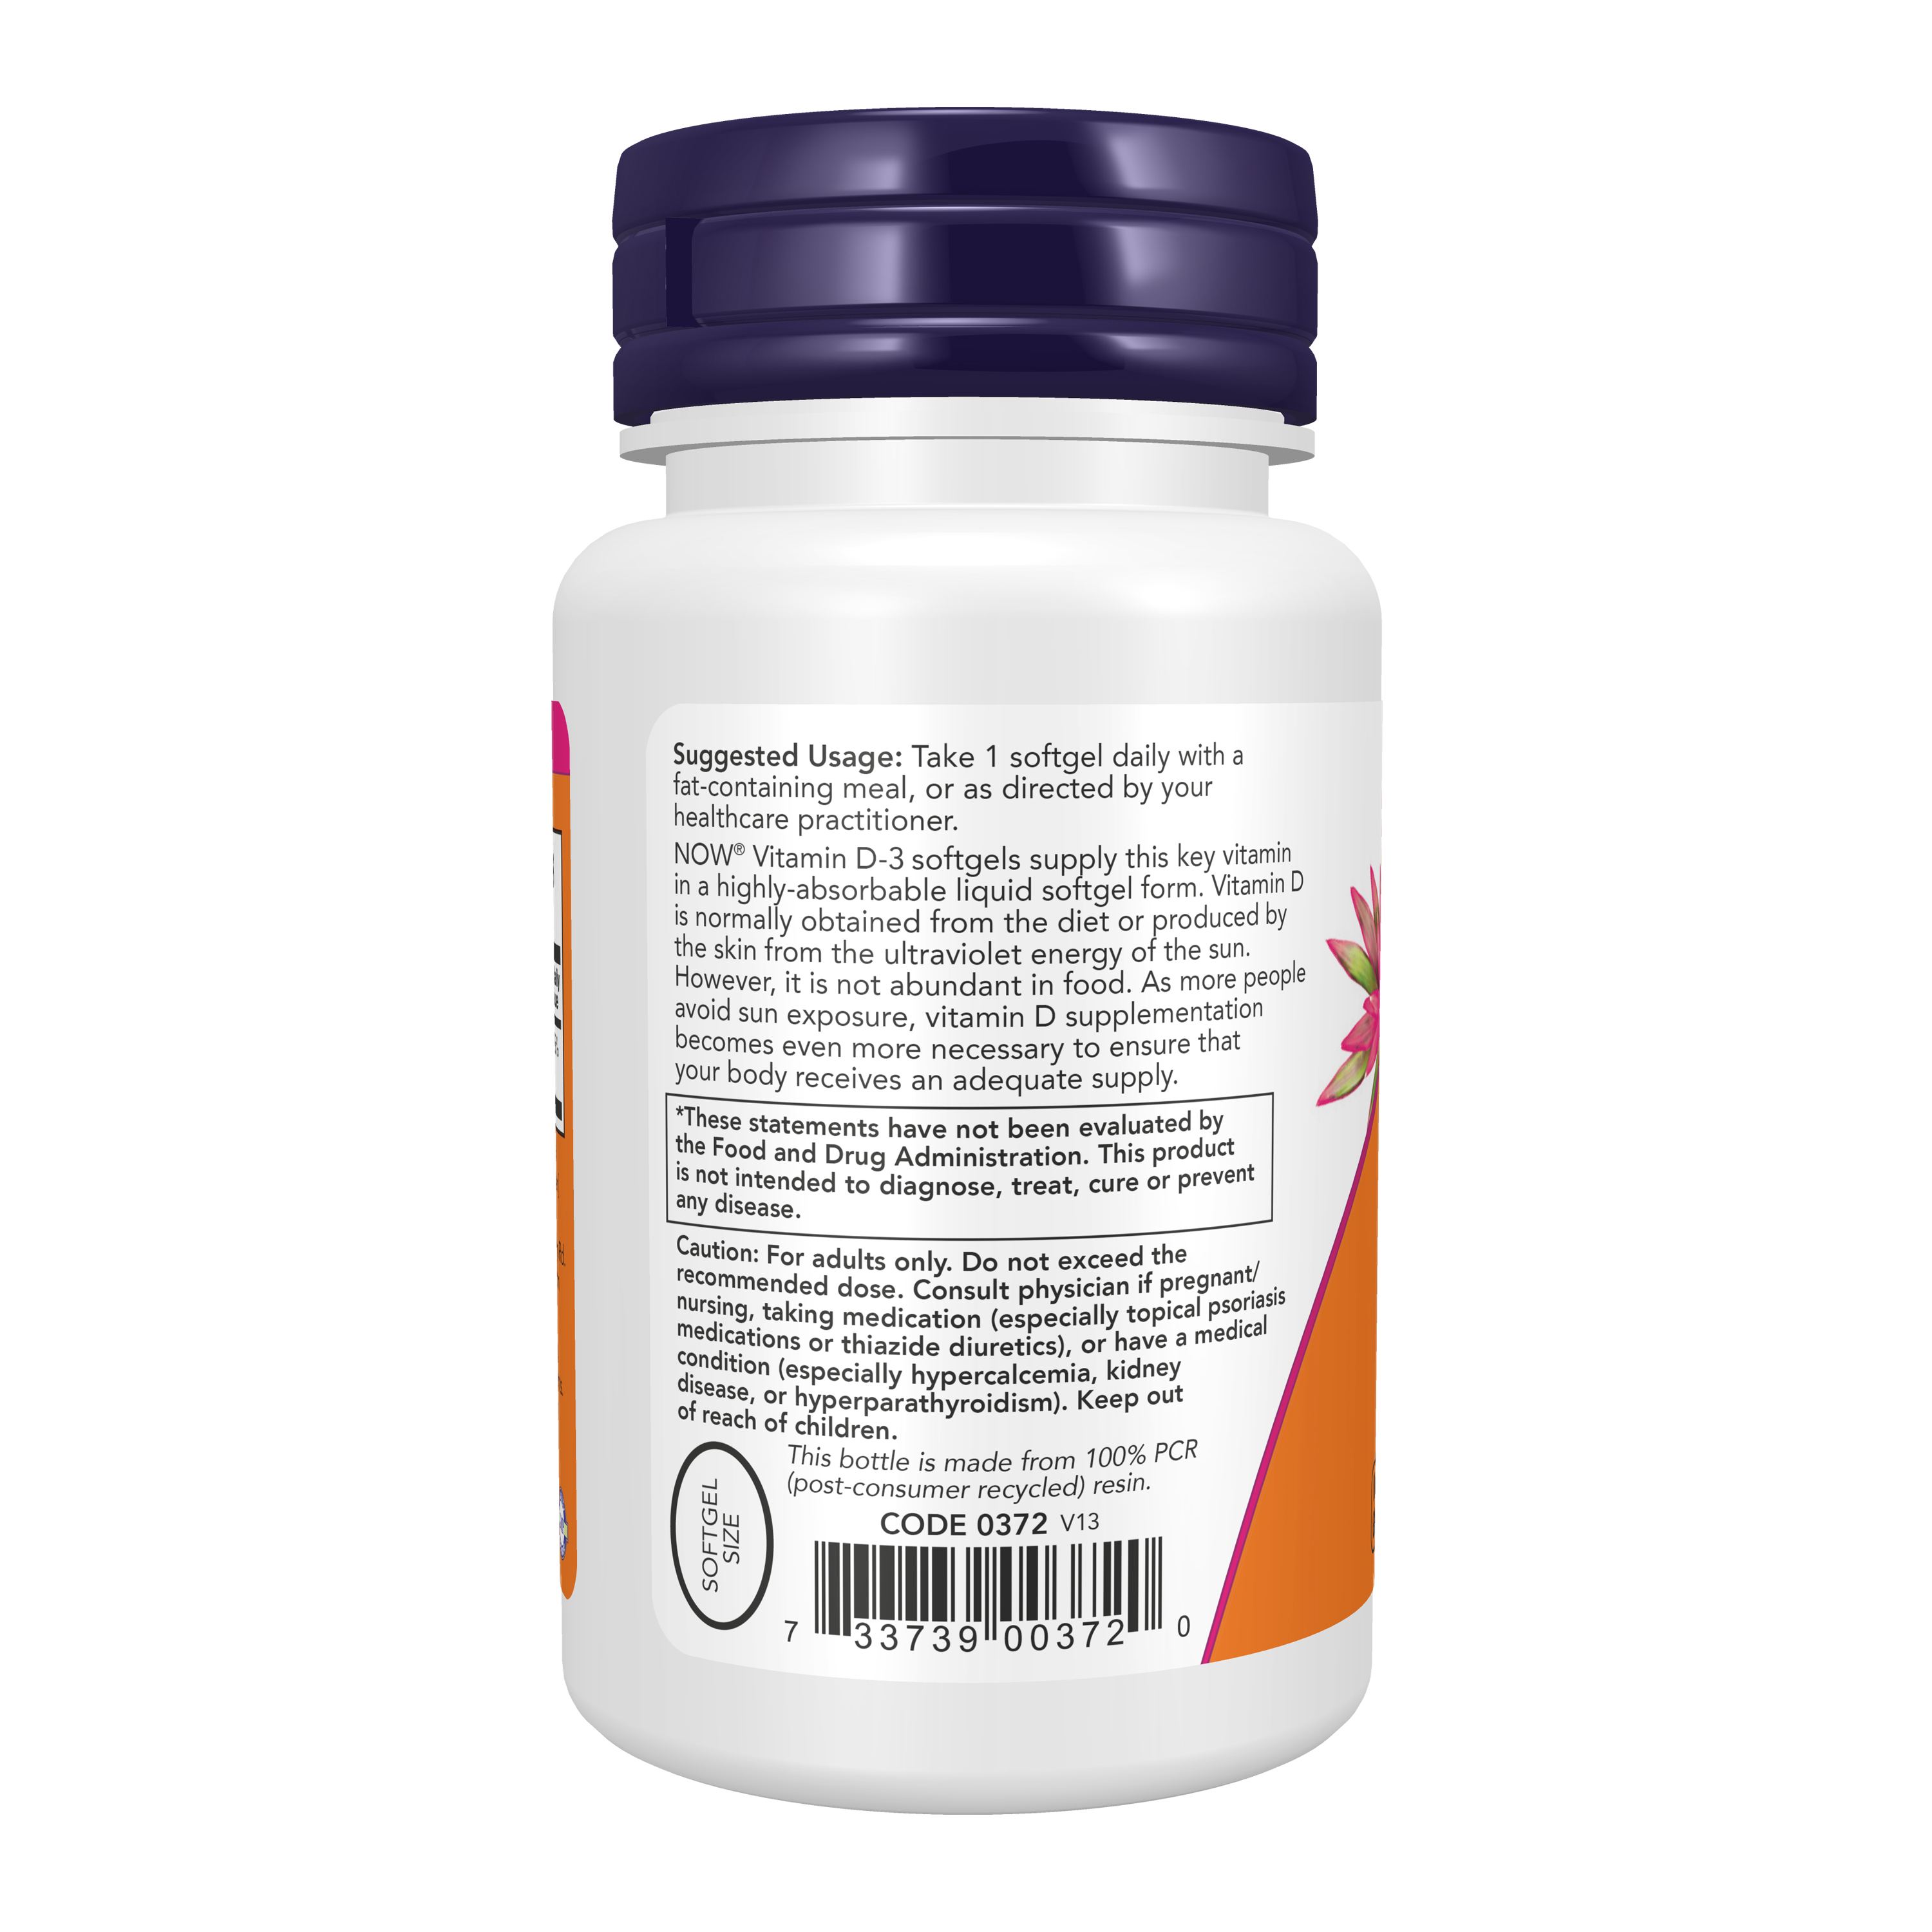 NOW Supplements, Vitamin D-3 5,000 IU, High Potency, Structural Support*, 120 Softgels - image 3 of 8